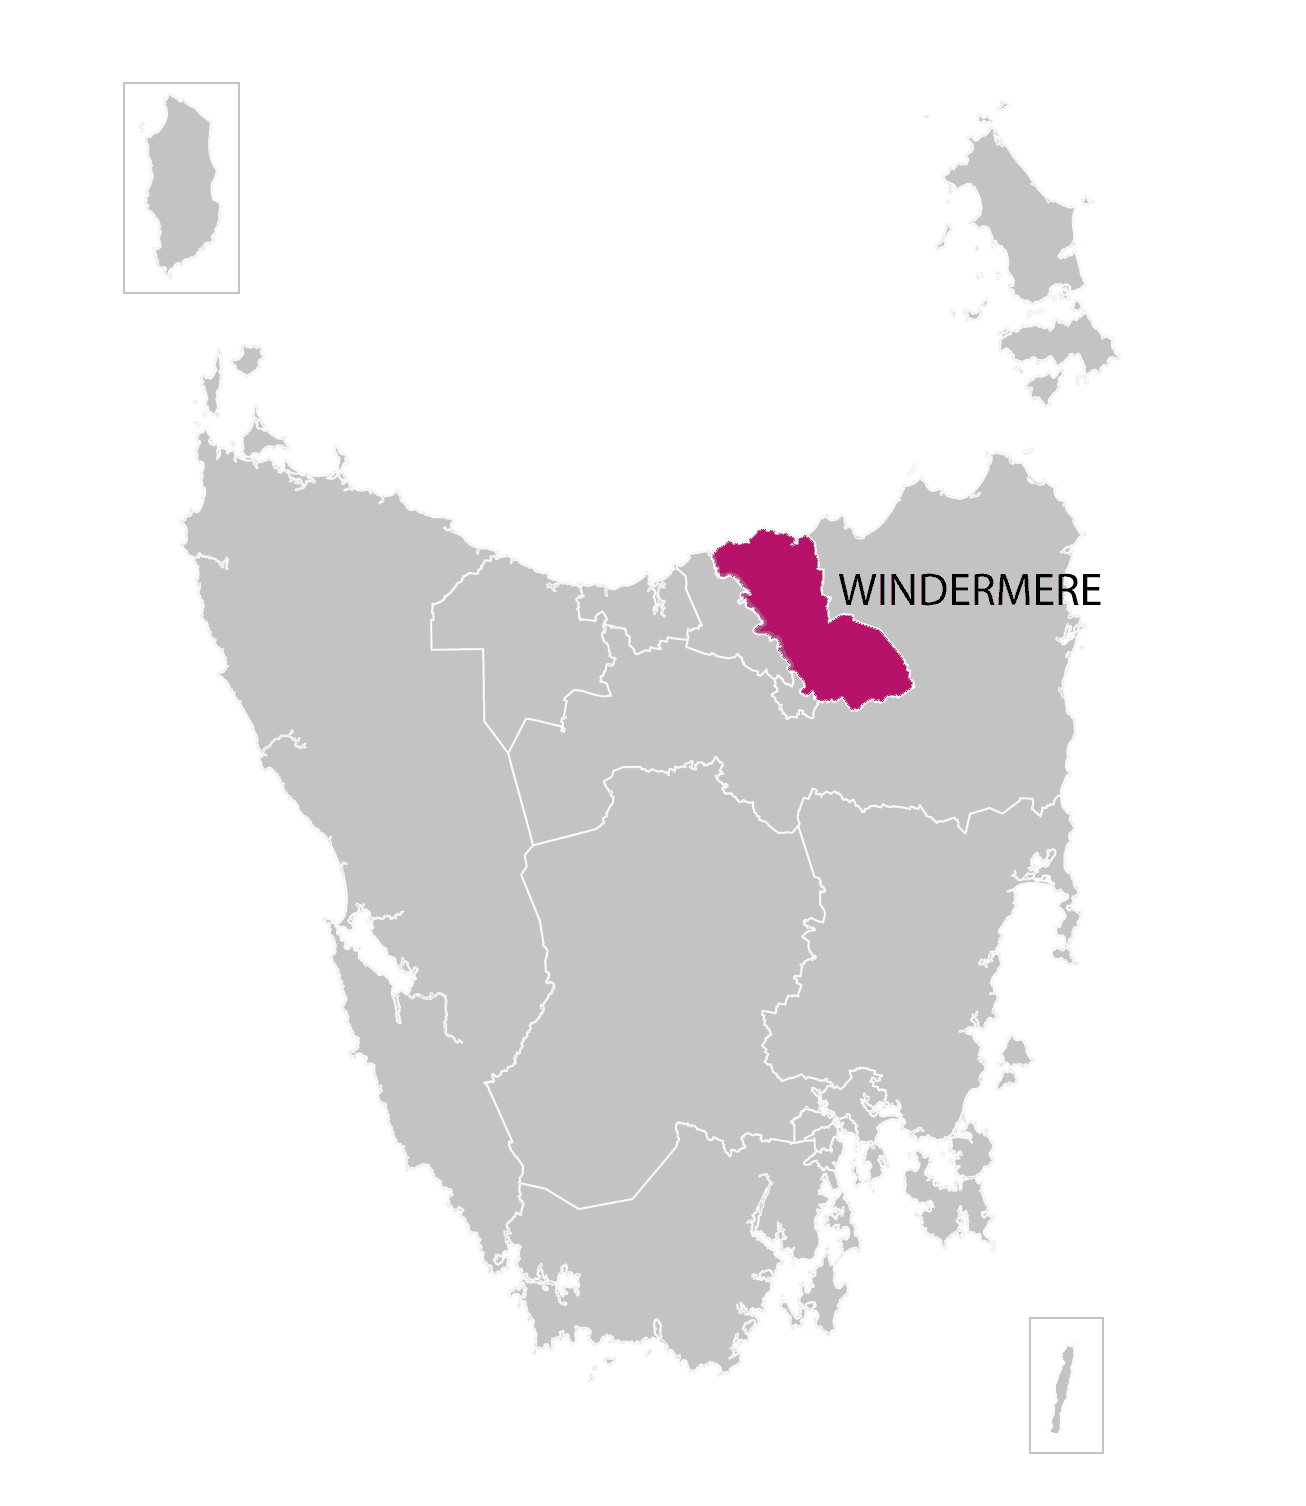 Windermere division highlighted on illustrated map of Tasmania